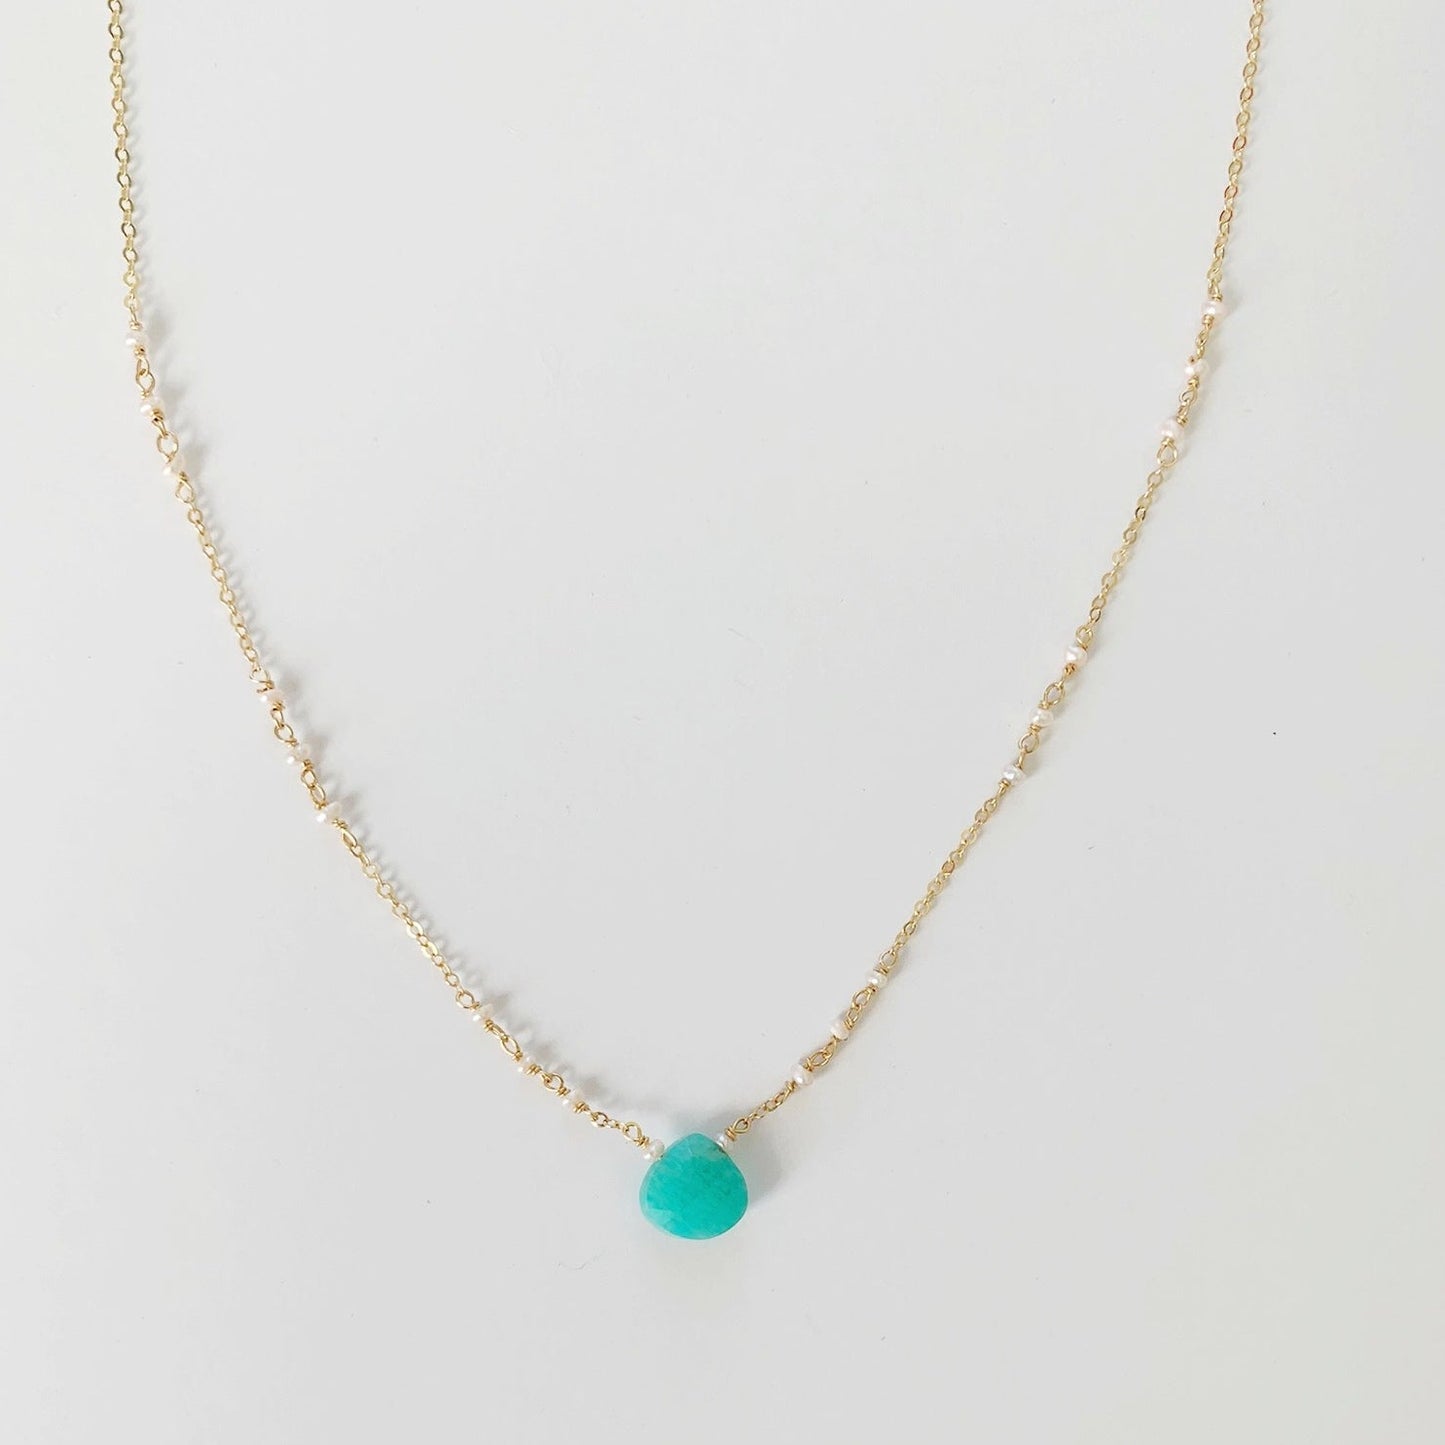 Island Air Necklace by mermaids and madeleines is created with a bright amazonite gem at the center and tiny freshwater pearls on 14k gold filled chain. this necklace is photographed on a white background